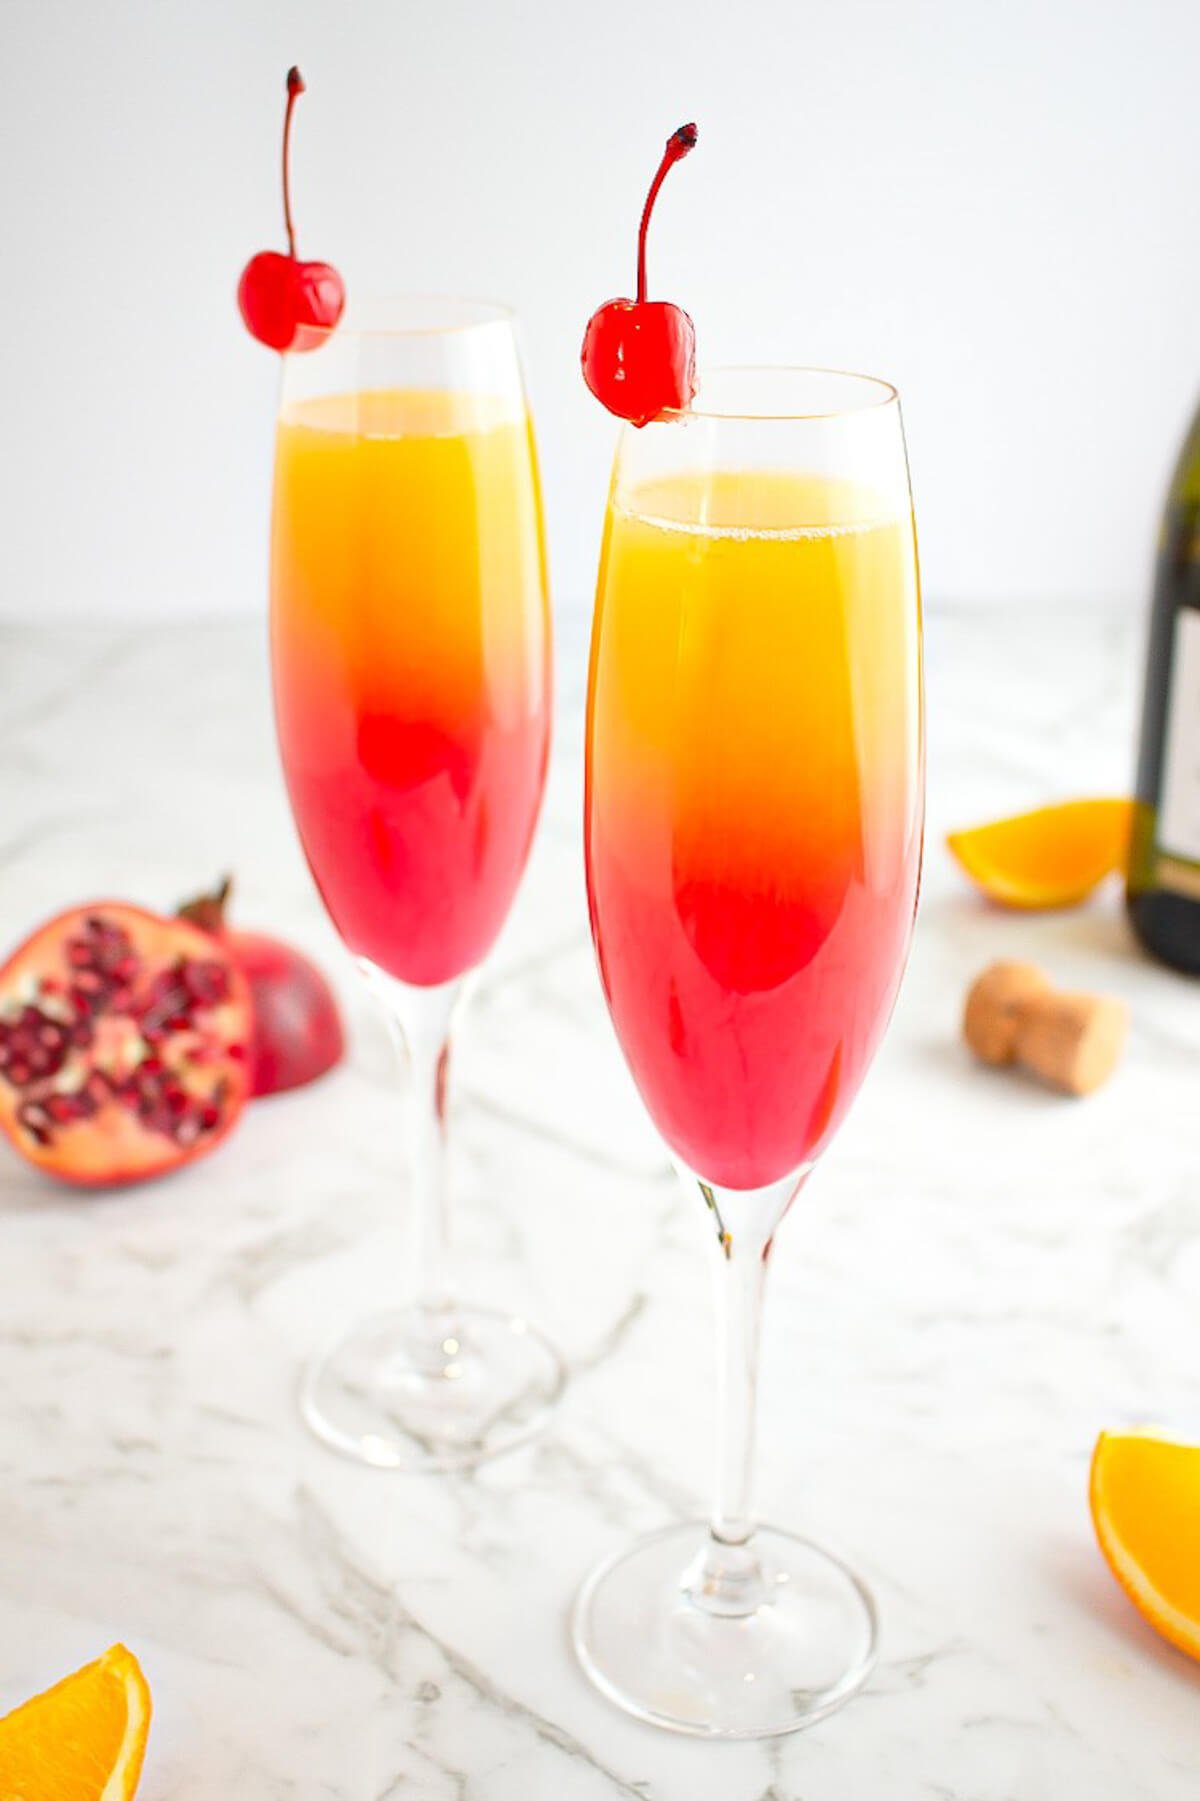 champagne glasses filled with a sunrise drink with red on the bottom progressing to orange then yellow, garnished with a maraschino cherry.